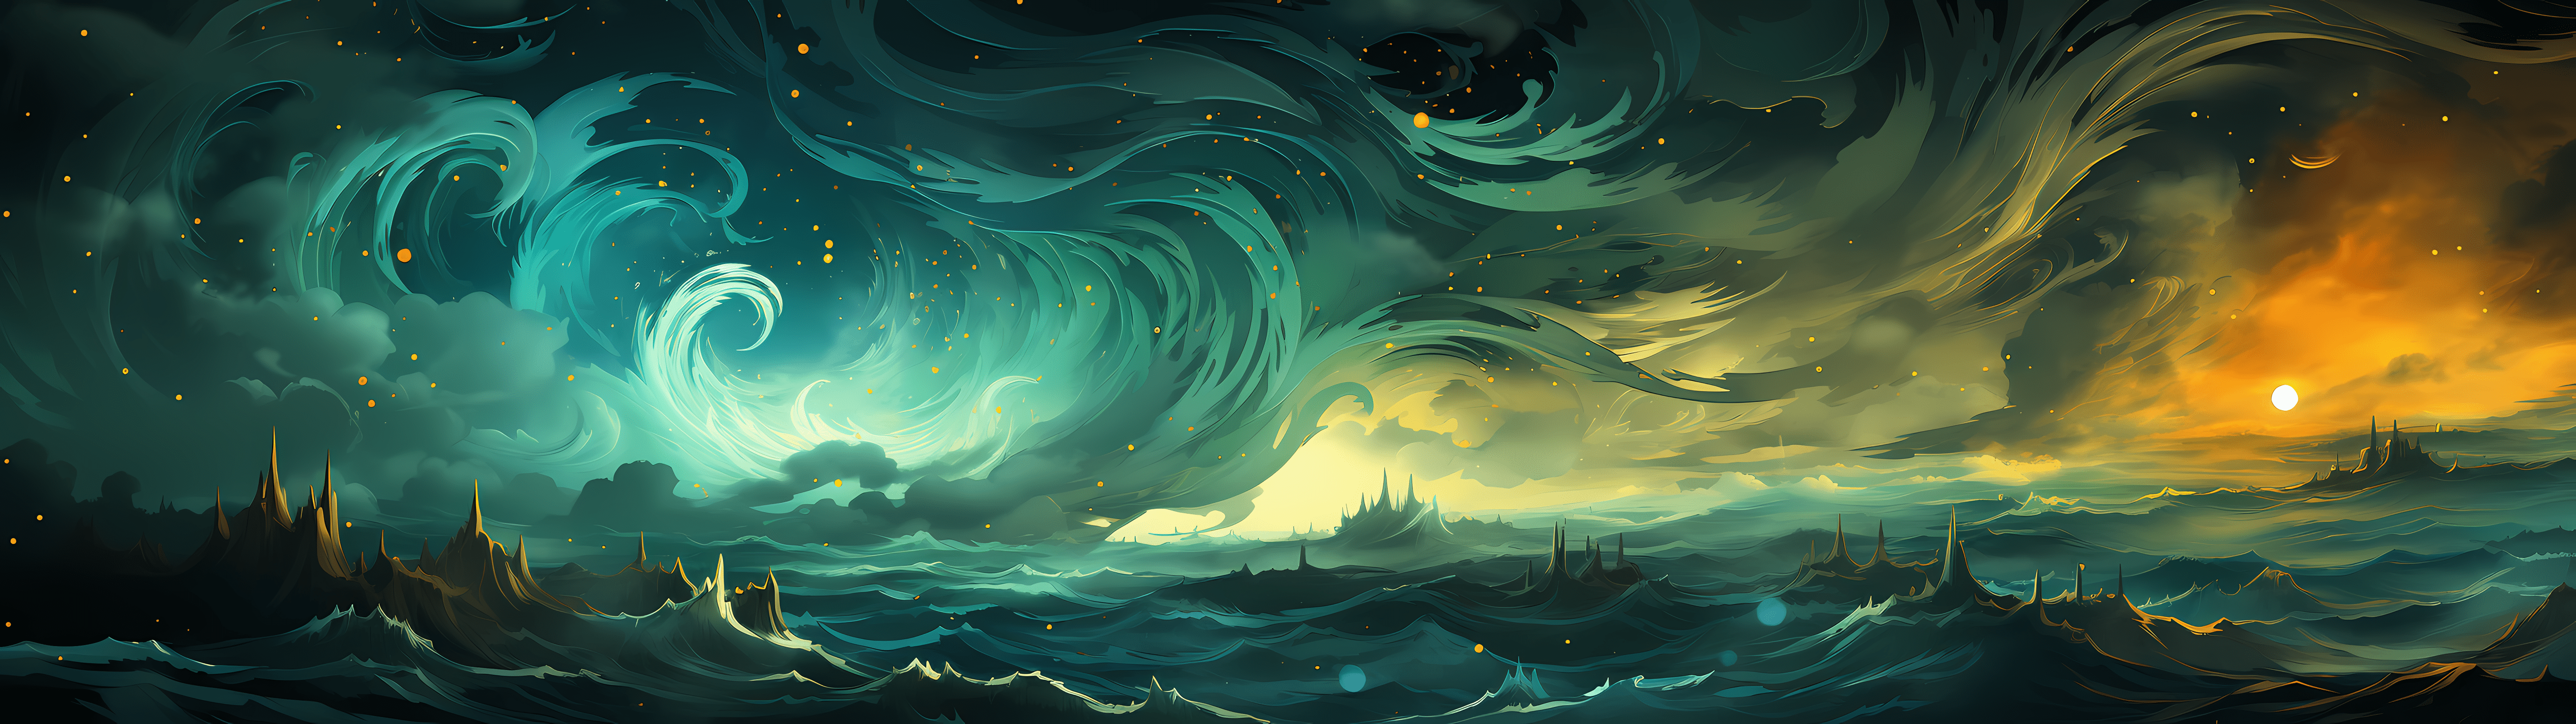 A painting of a stormy sea with ships at sea - 5120x1440